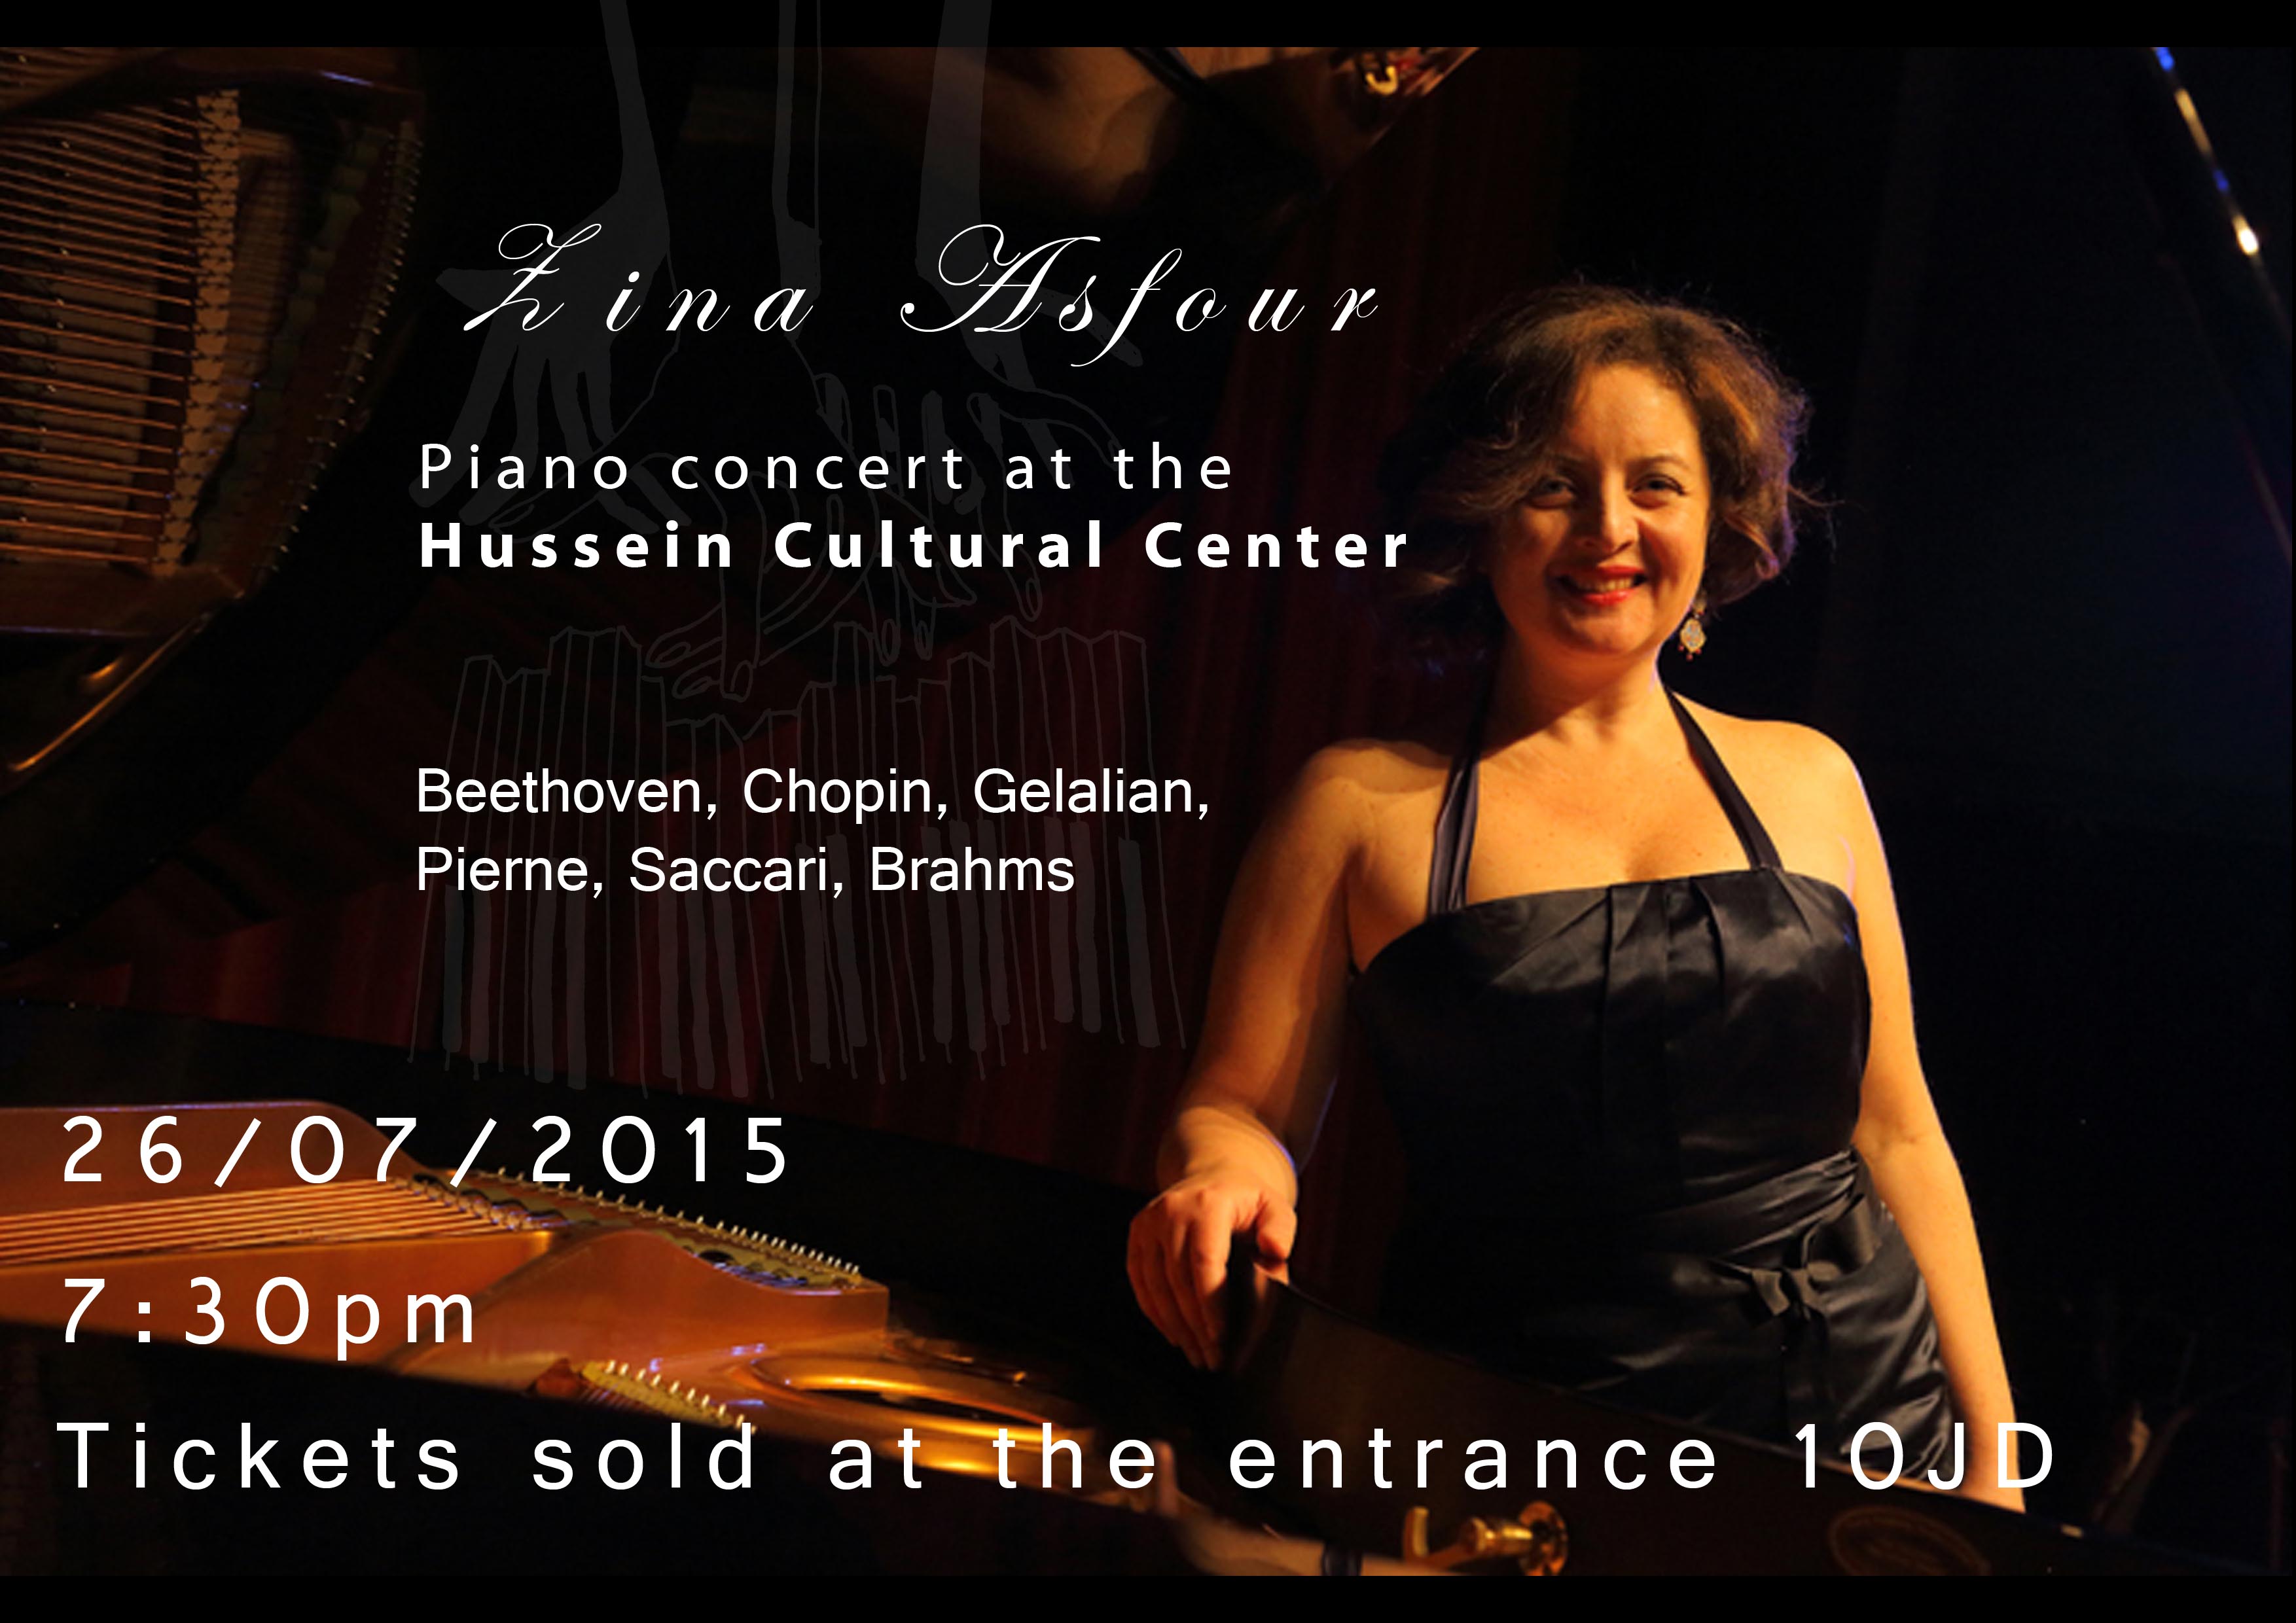 Piano Concert at the Hussein Cultural Center at 7:30 pm